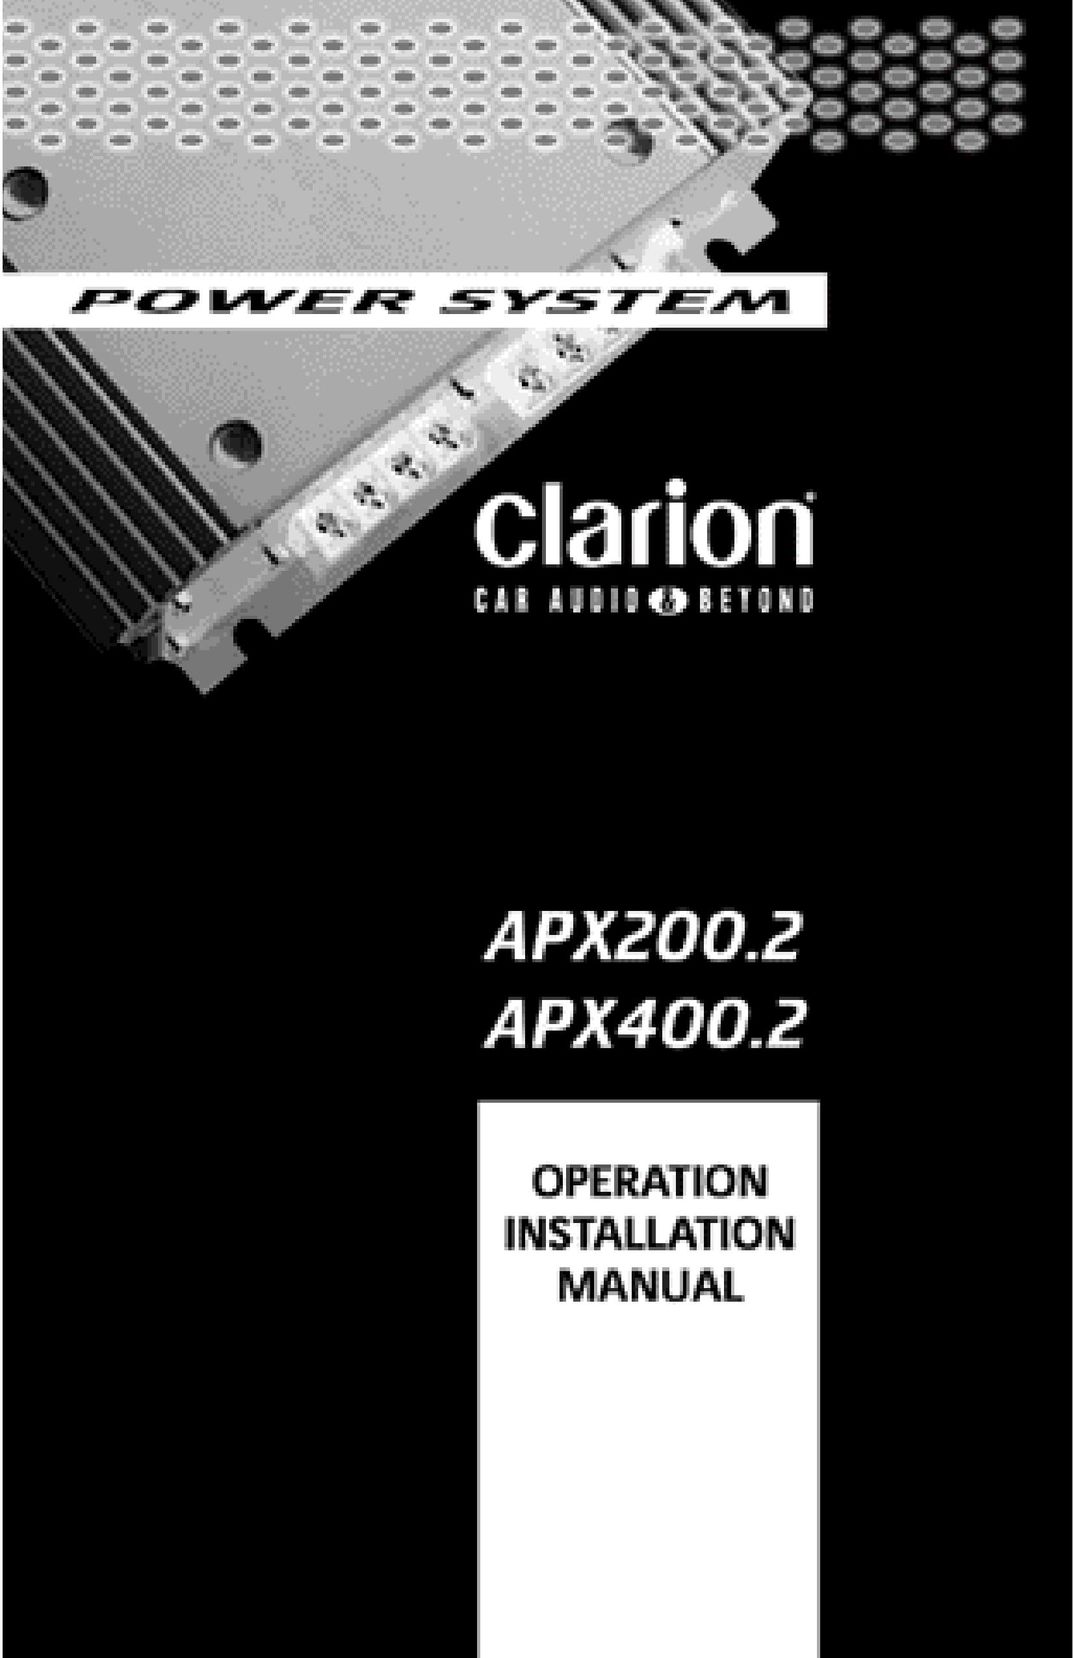 Clarion APX200.2 Power Supply User Manual